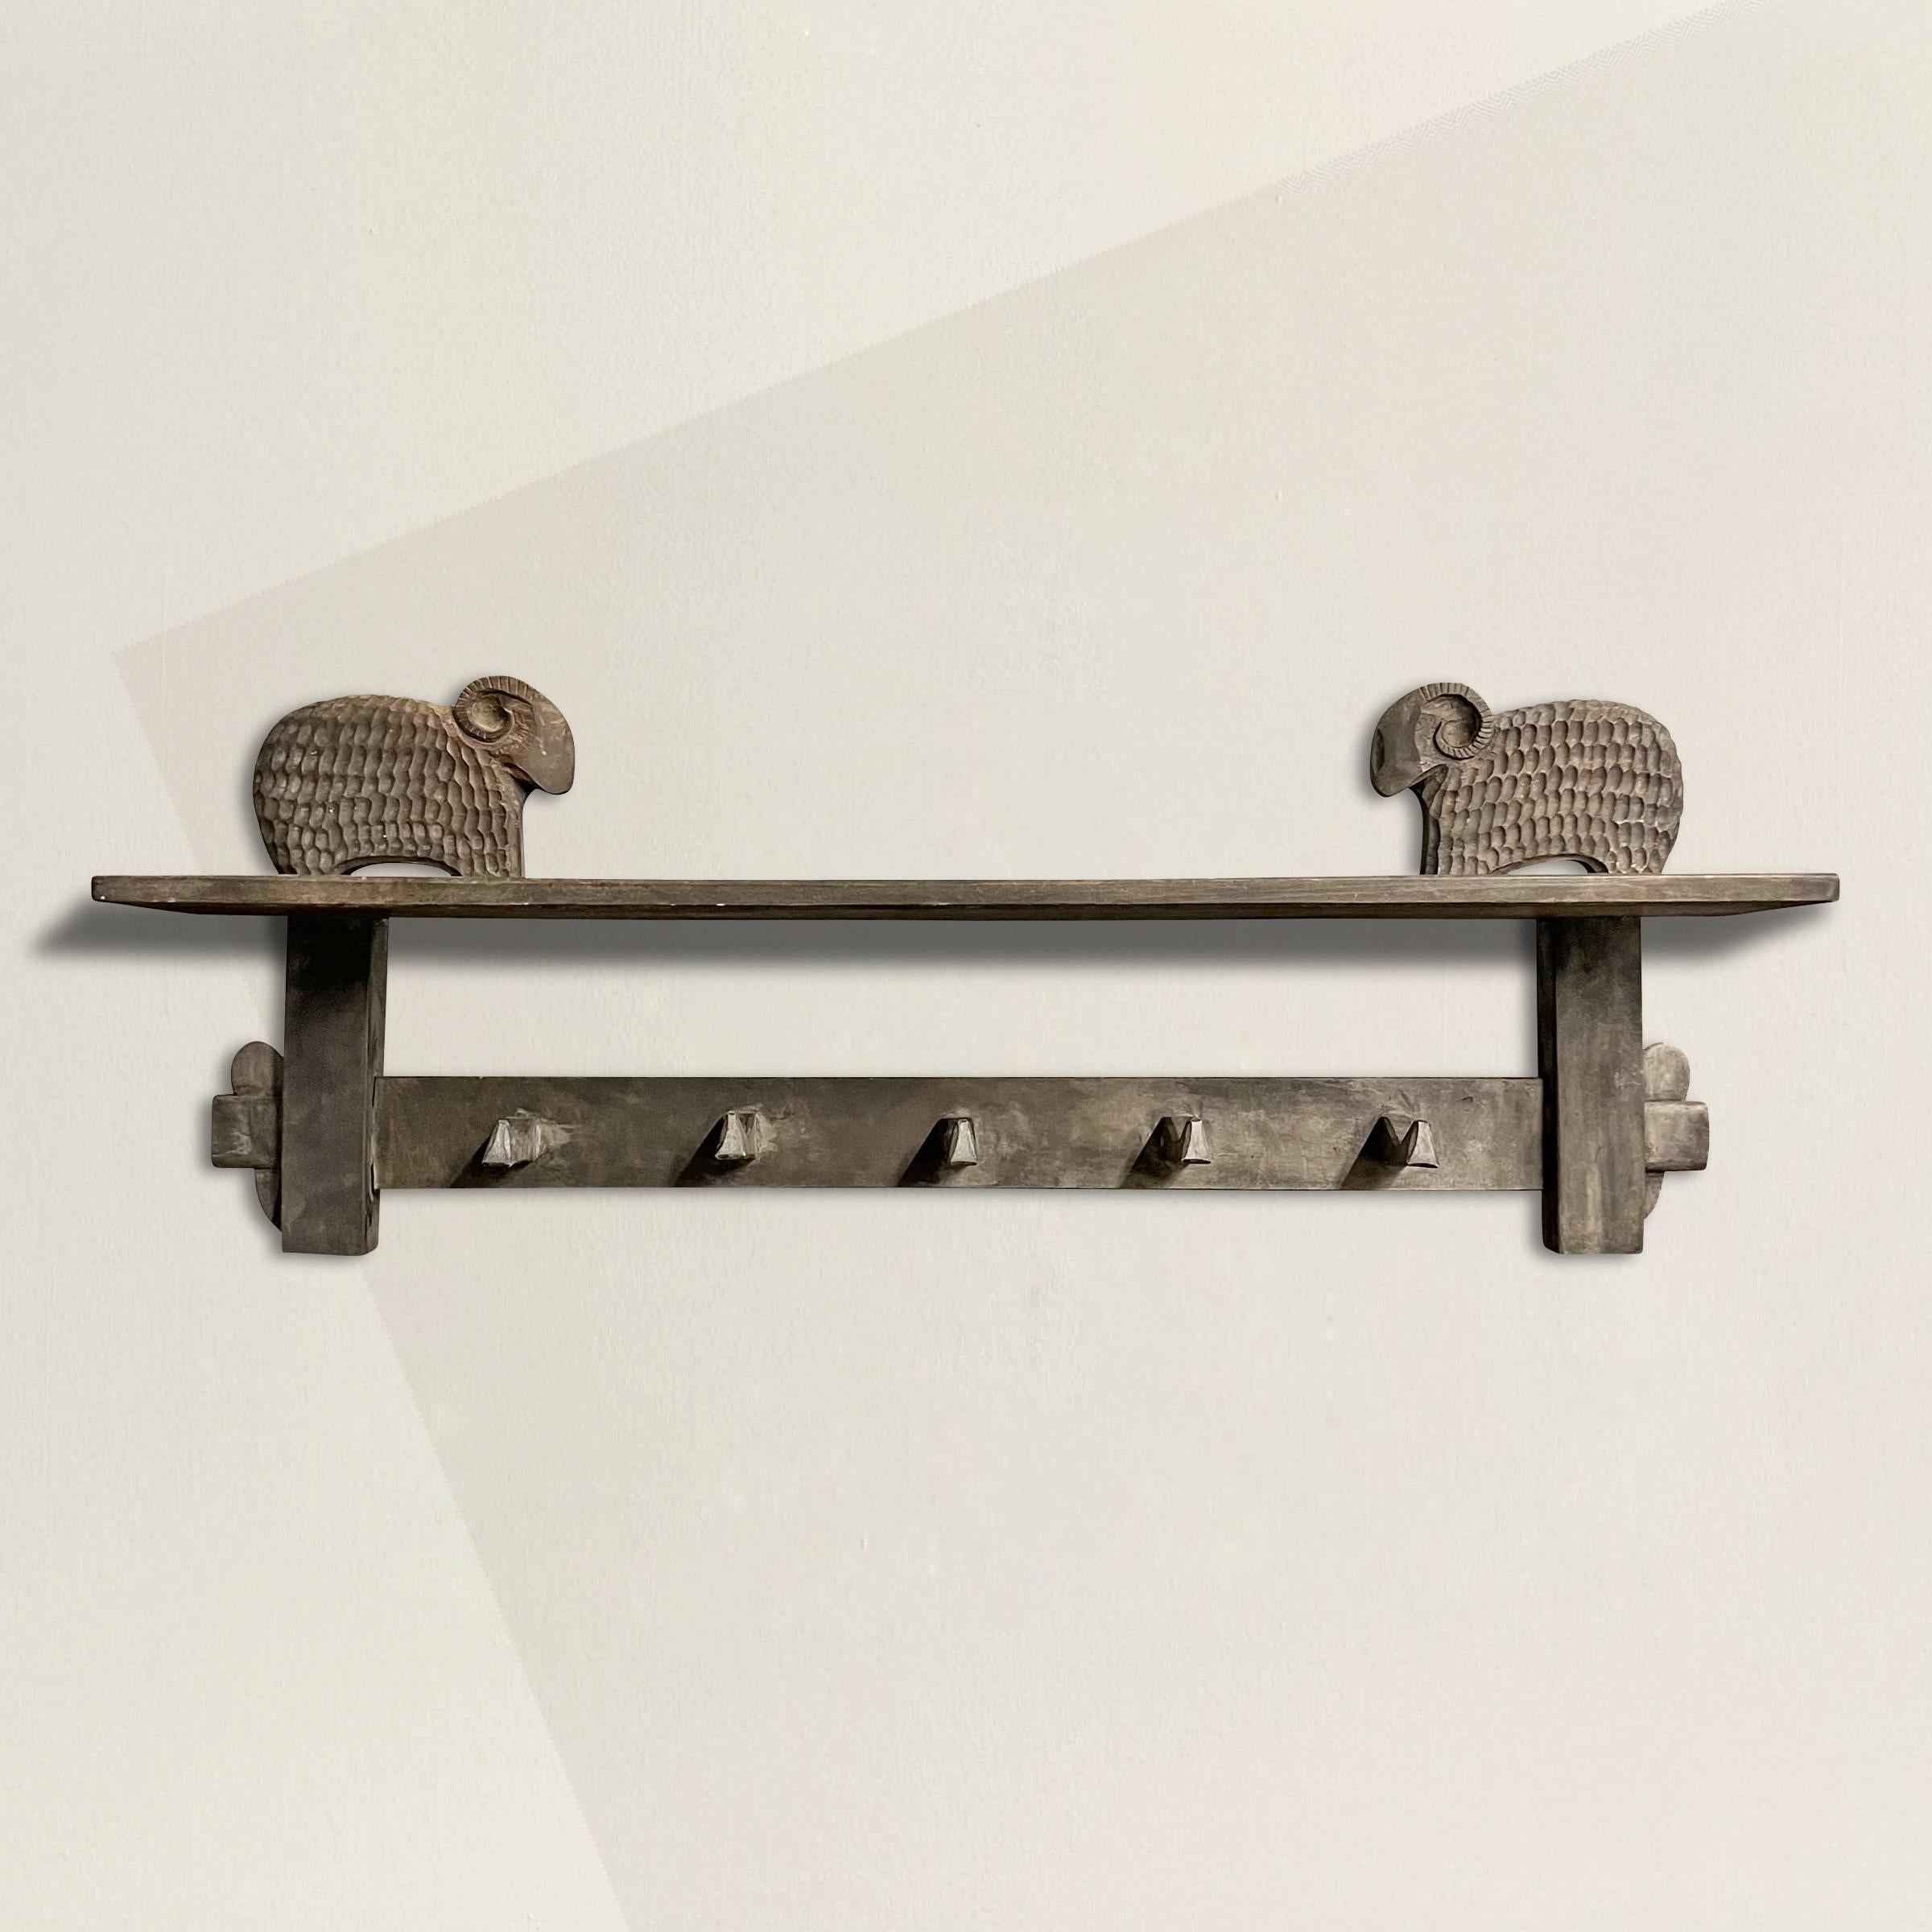 Add a touch of mid-century French modernist charm to your space with this exceptional 1950s wall shelf and coat rack. Crafted with an eye for both functionality and artistic design, this shelf features five convenient coat or hat hooks and two